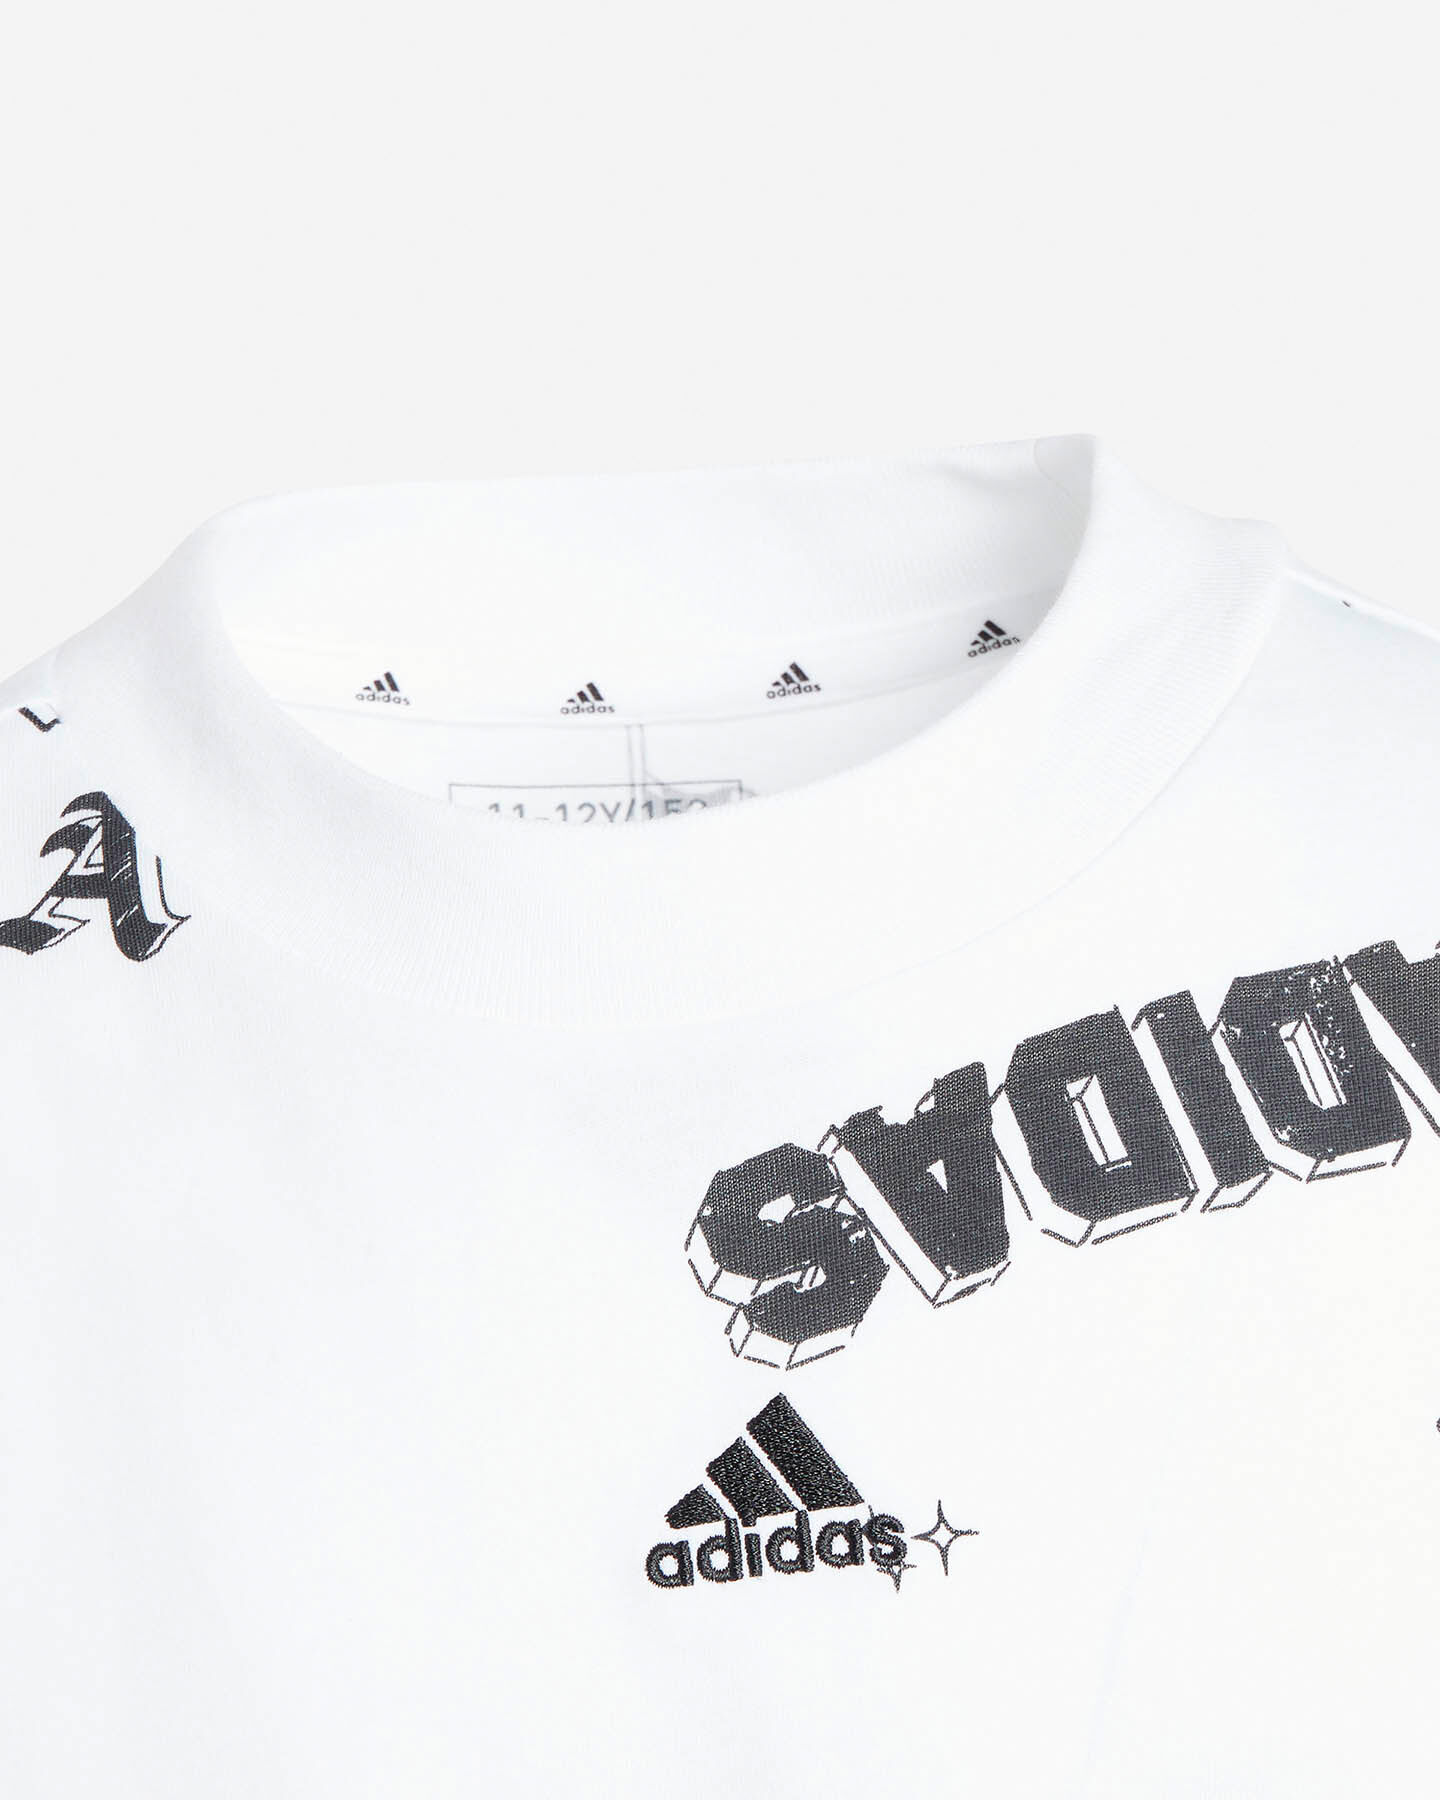  T-Shirt ADIDAS ALL OVER JR S5590804|UNI|910A scatto 3